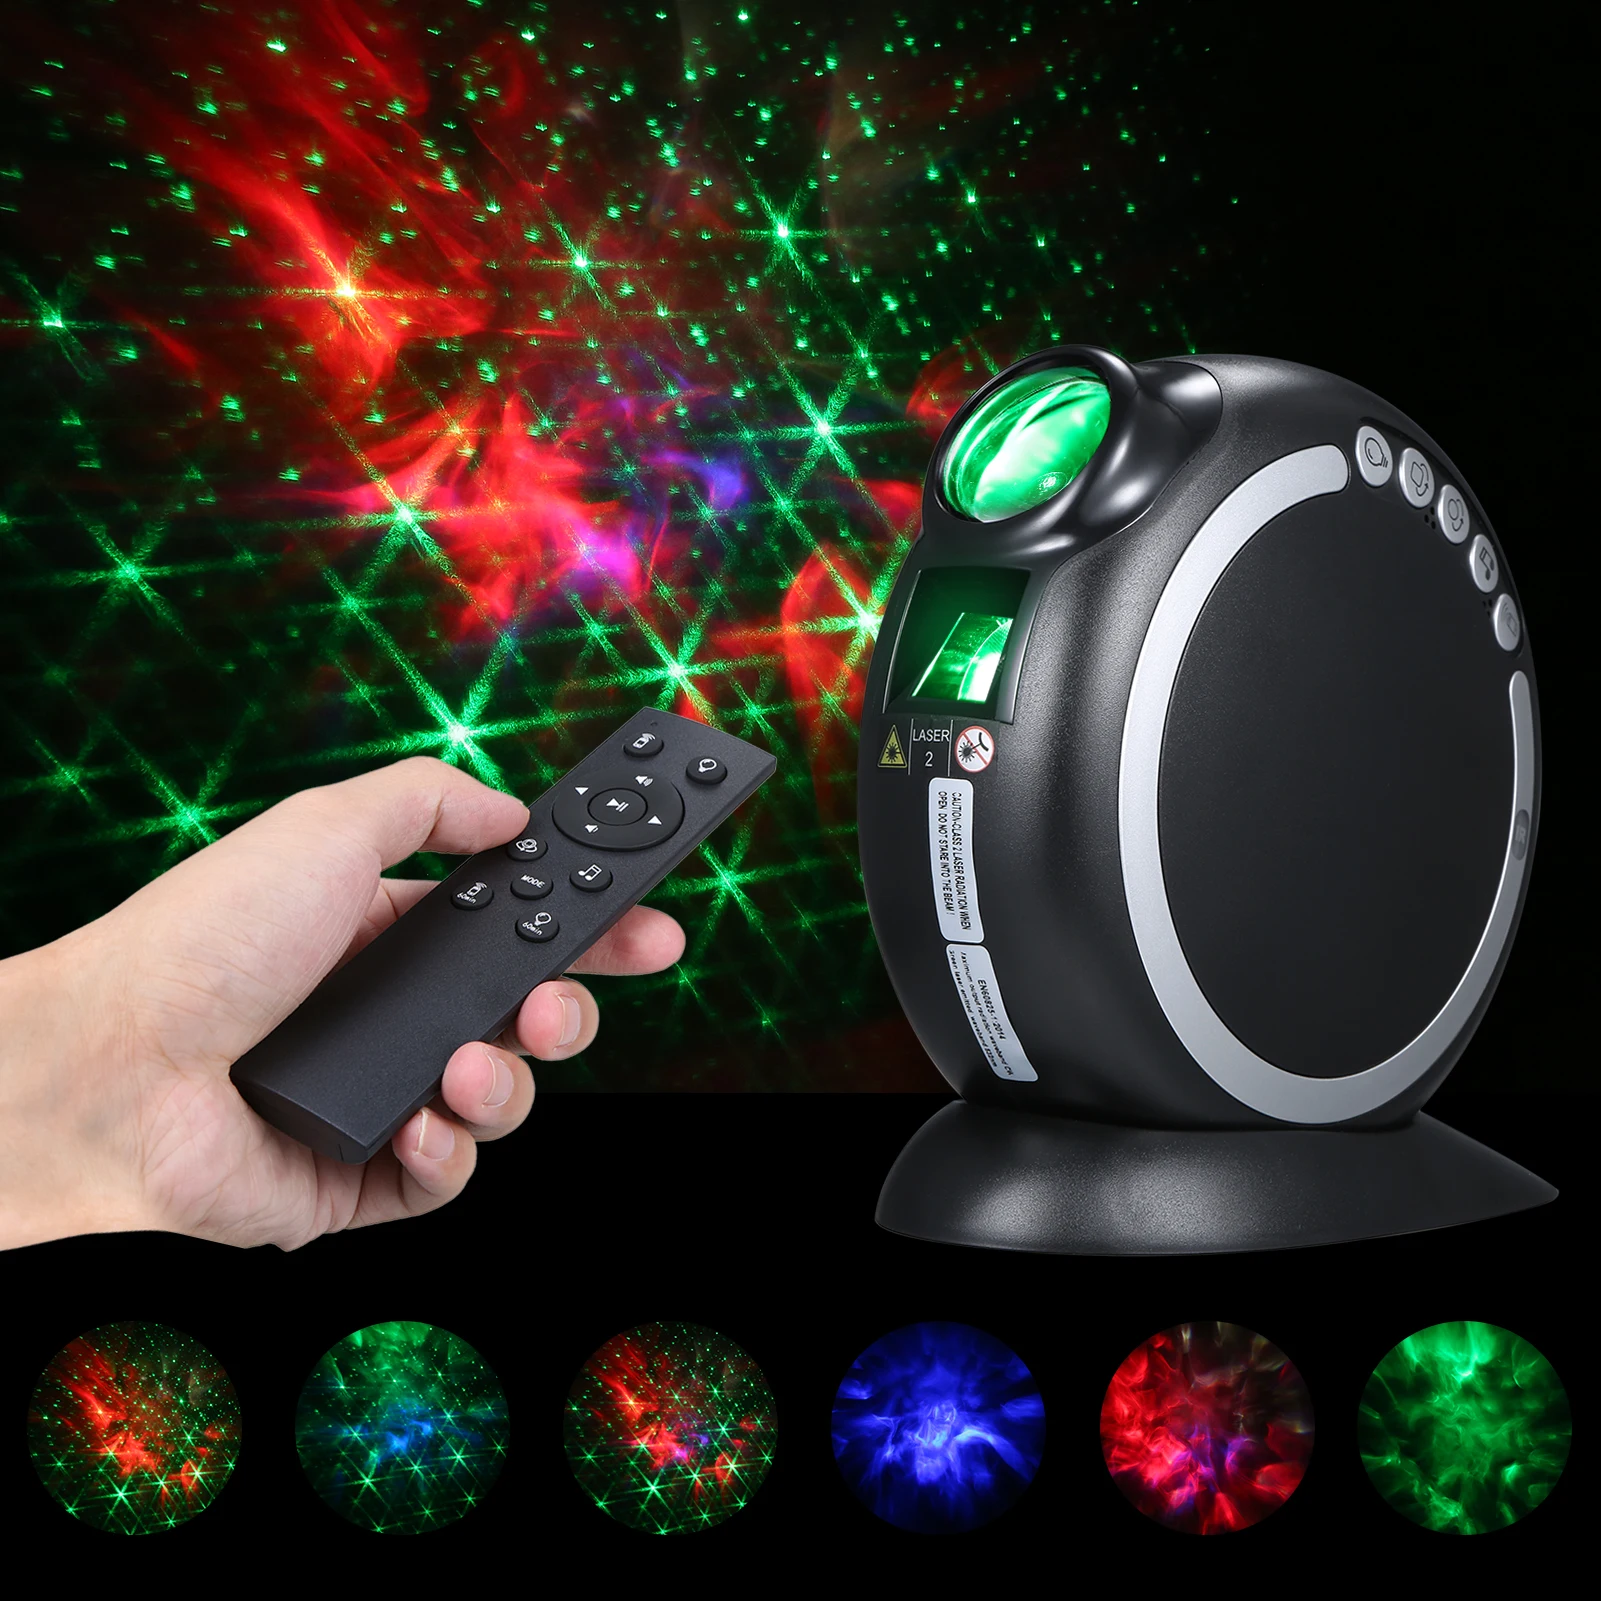 

New BT Star Projector Night Light S-tarry Night Lamp USB RGBW Mini LEDs Water W-ave Ripple Light with Controller Party Deco Kids